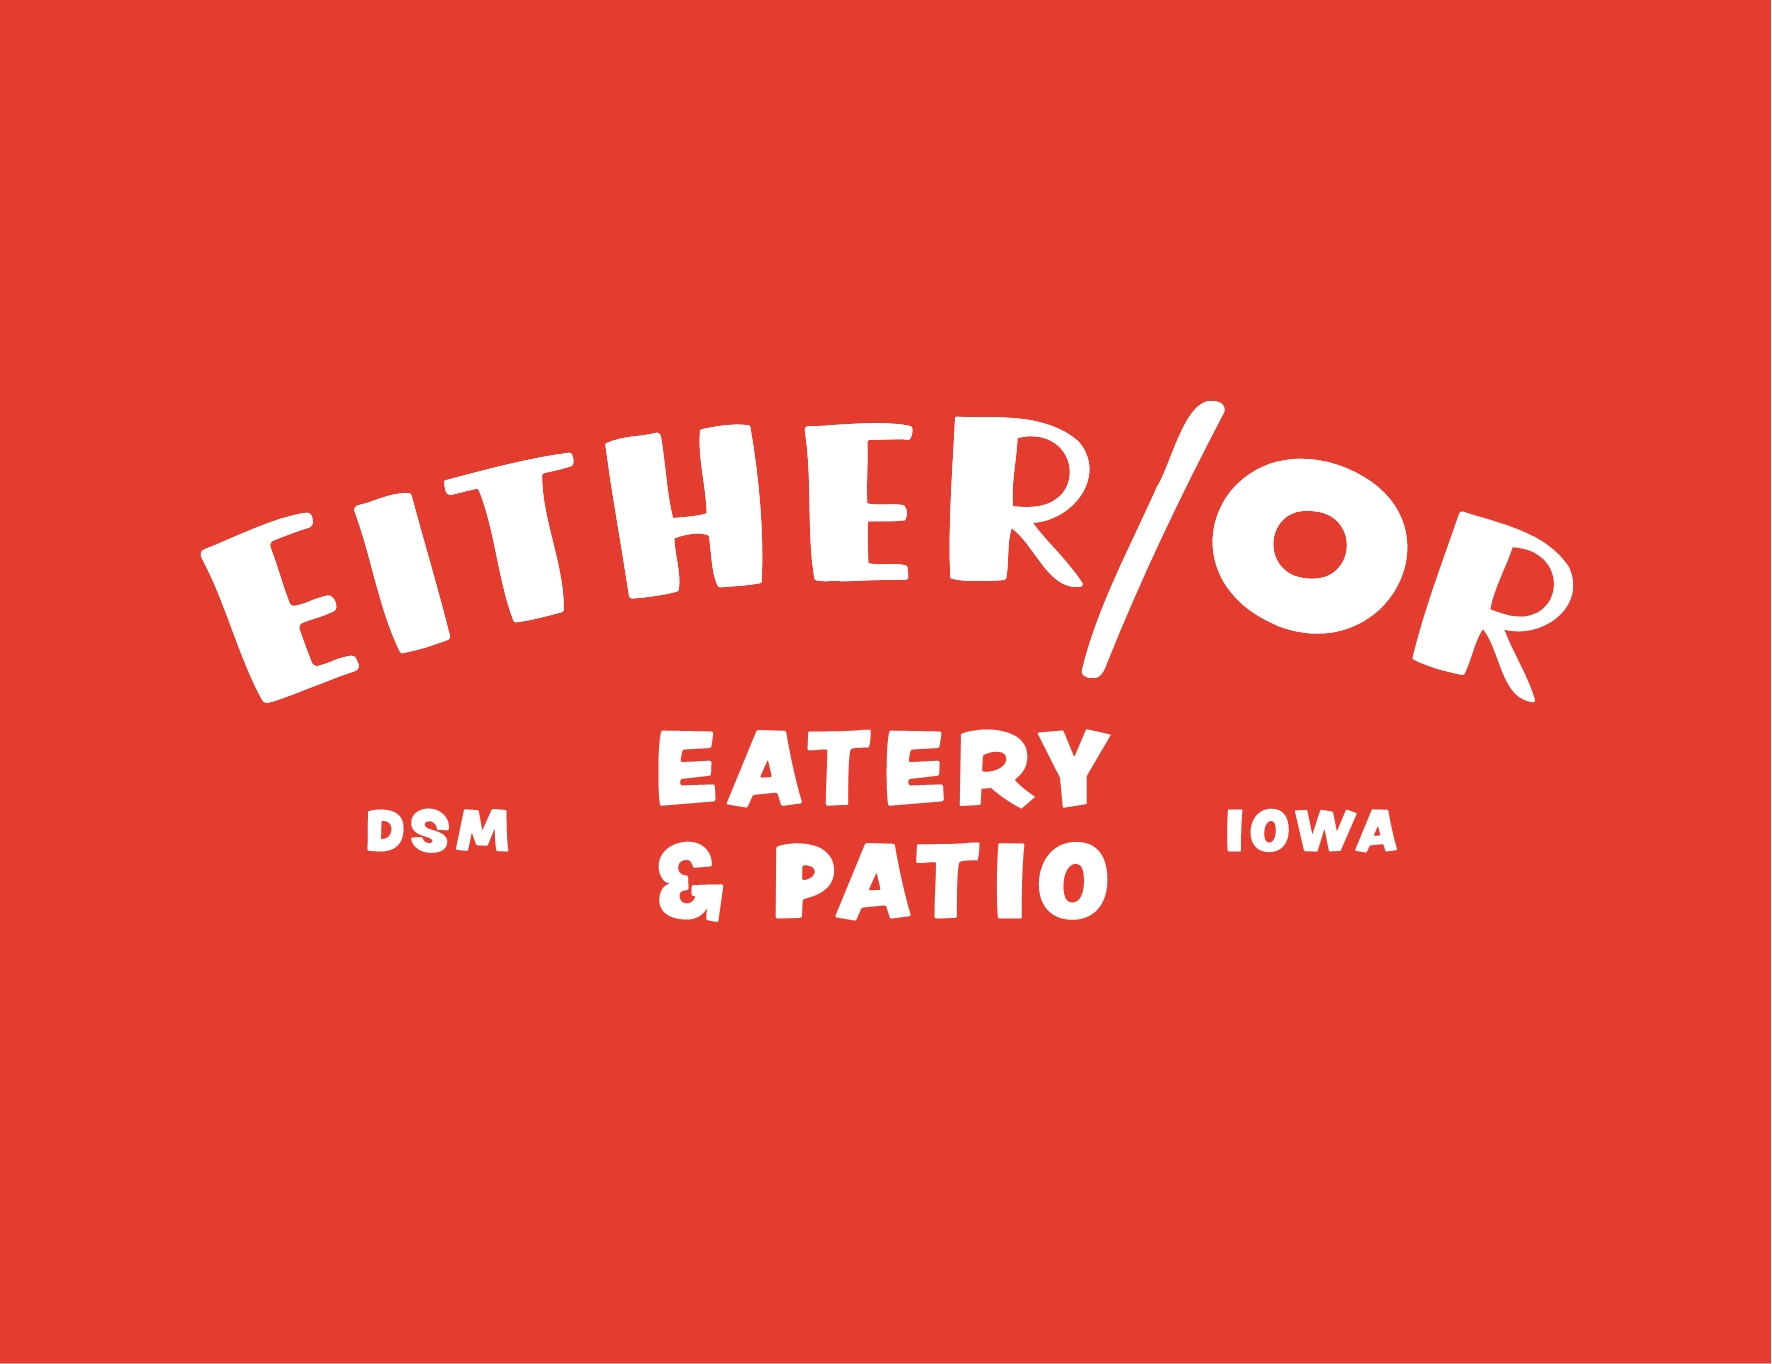 Either/Or Eatery & Patio Logo